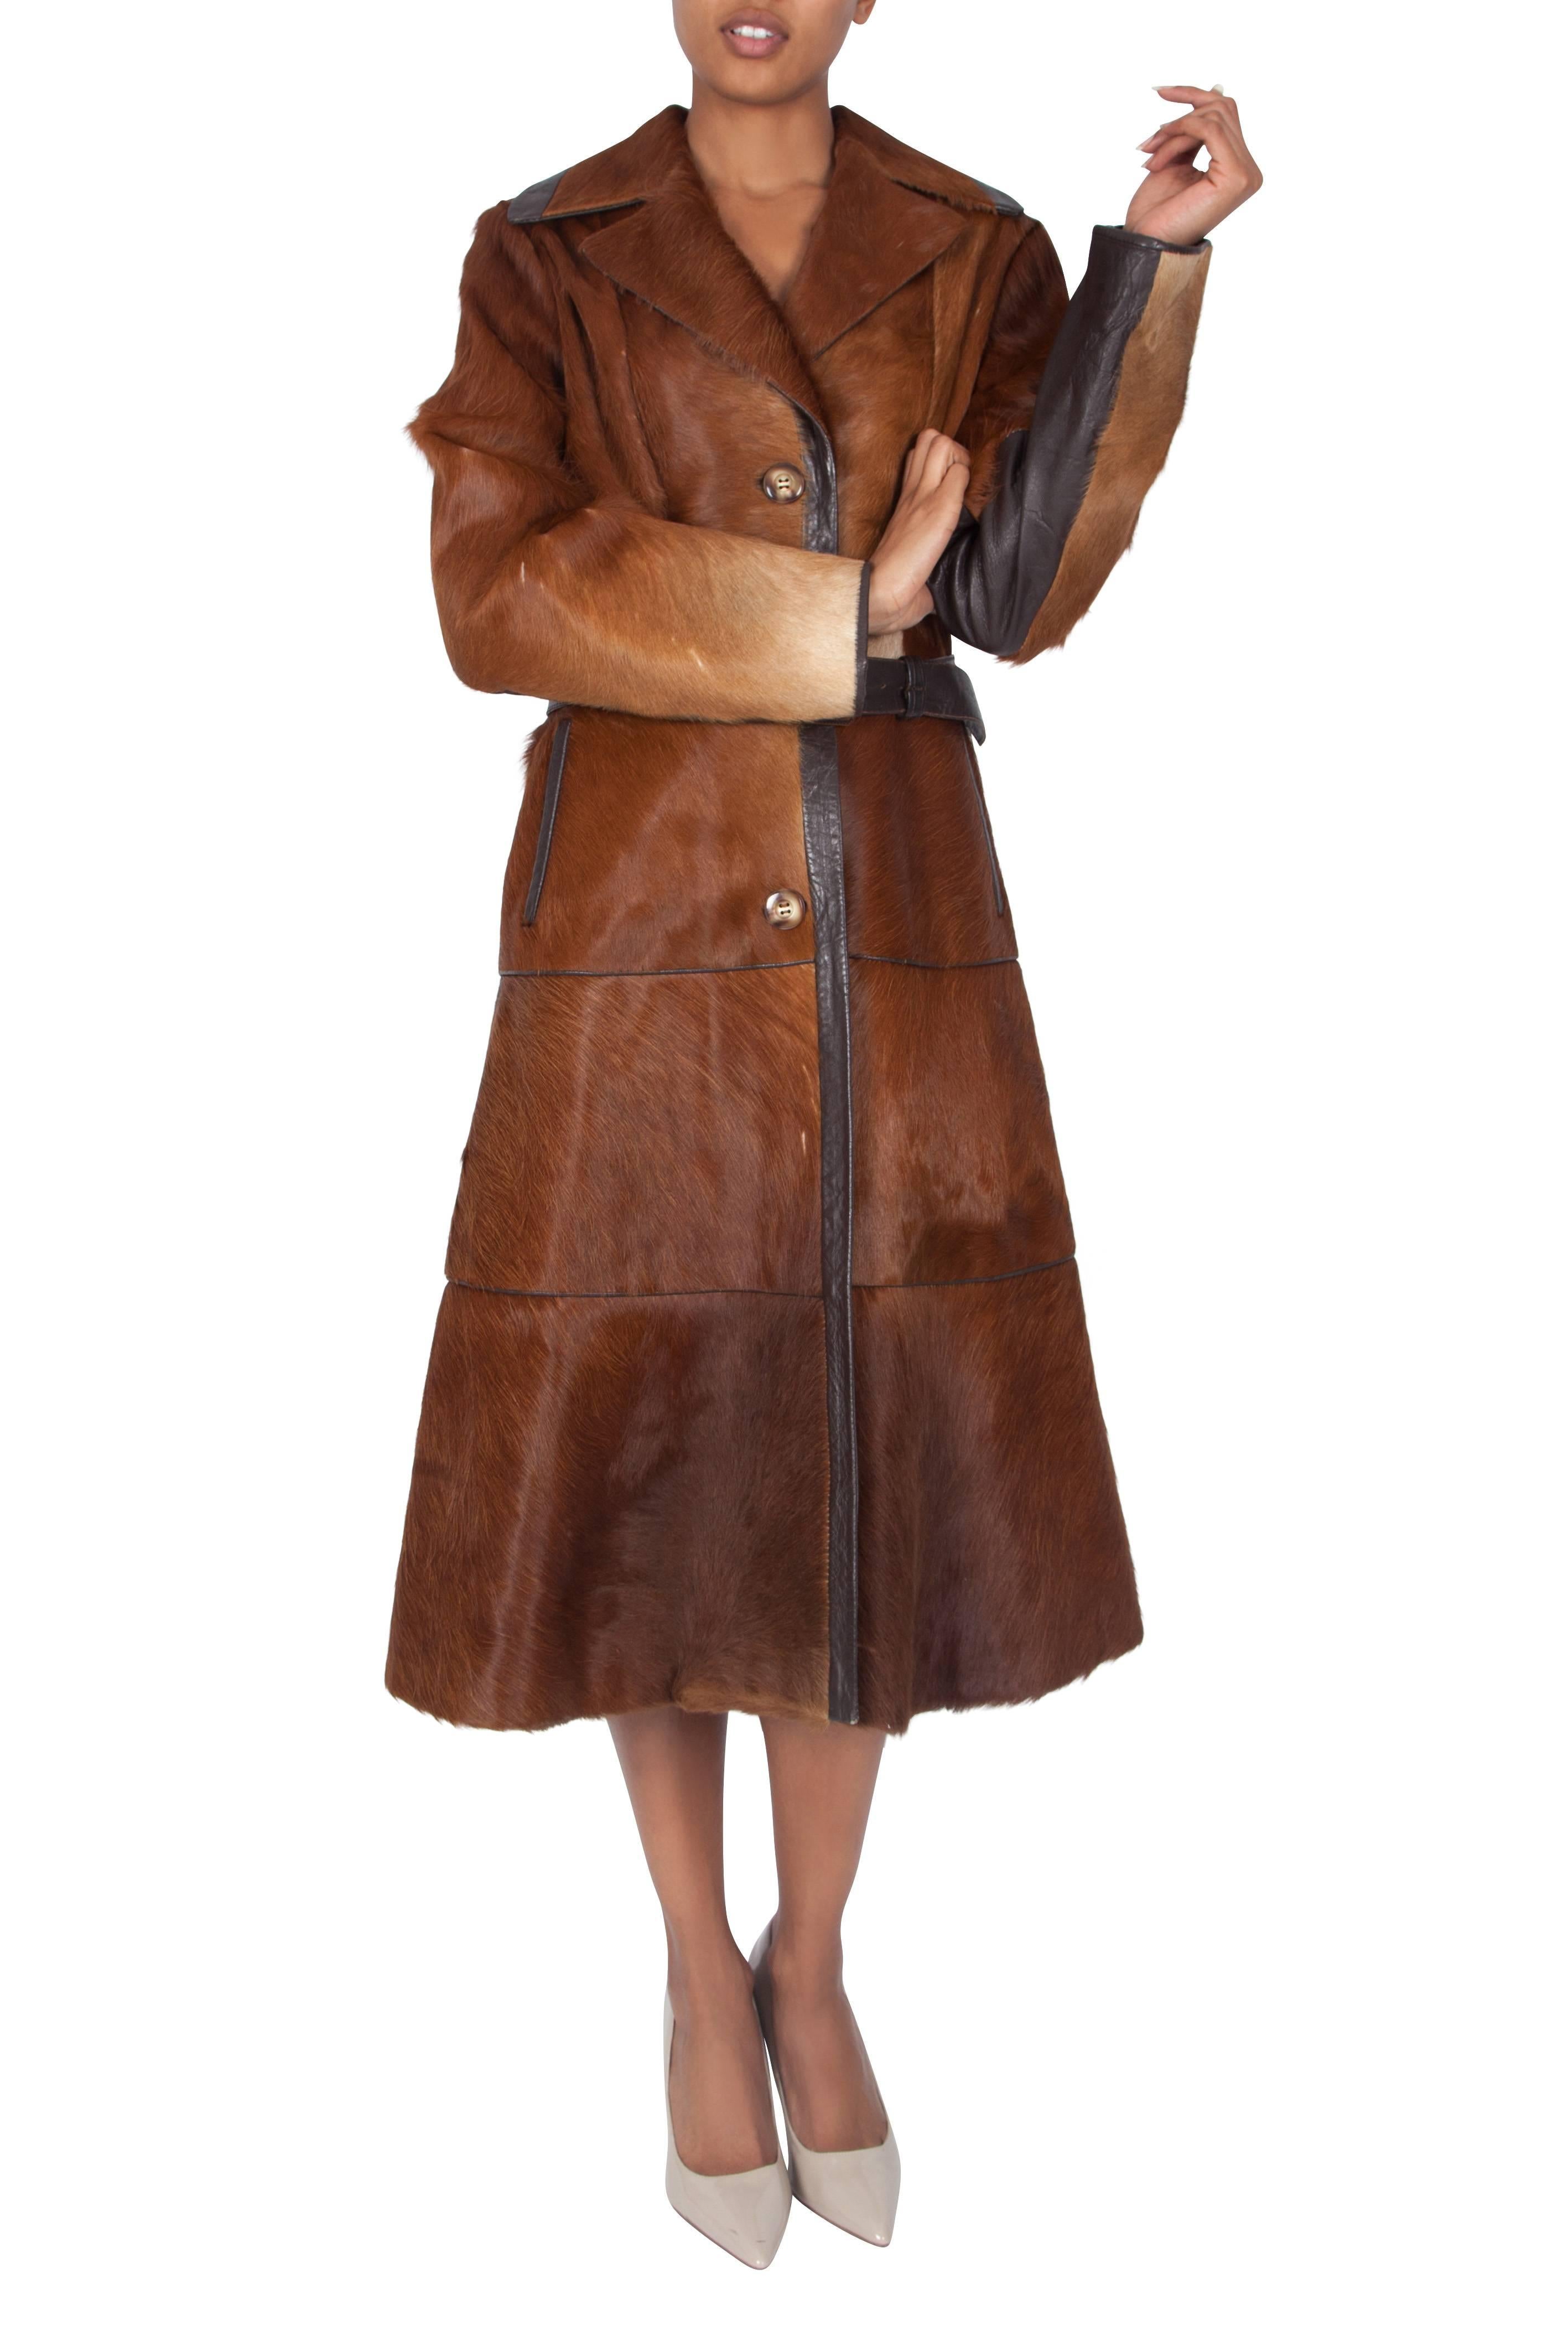 Women's 1970'S Brown Pony Skin Overcoat with Leather Belt